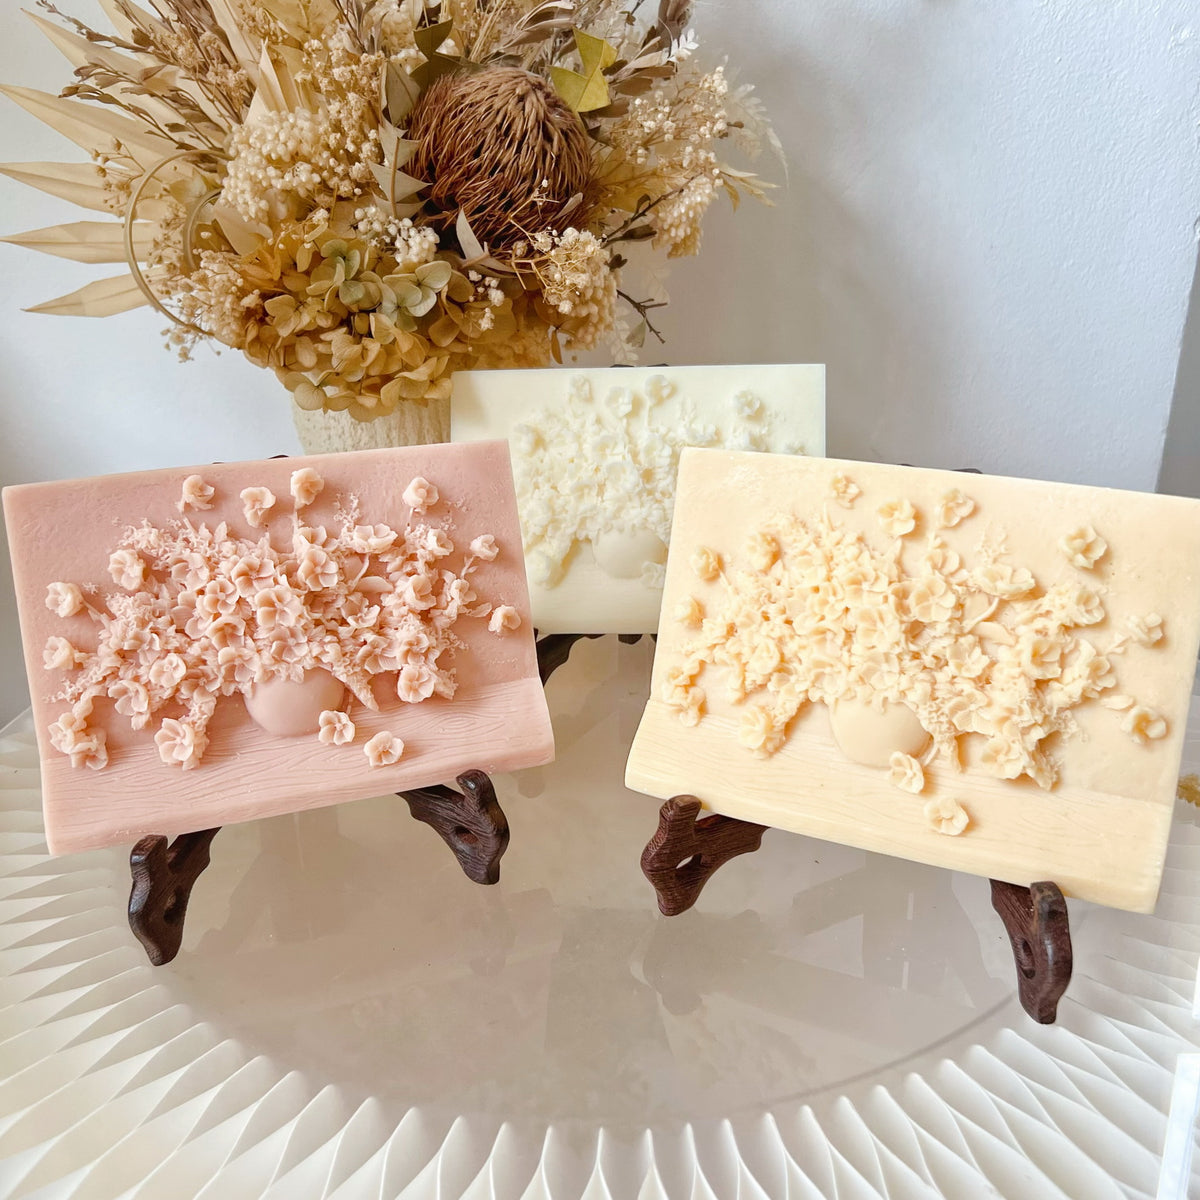 Flower Bouquet Scented Soy Wax Tablet, Home Décor - LMJ Candles